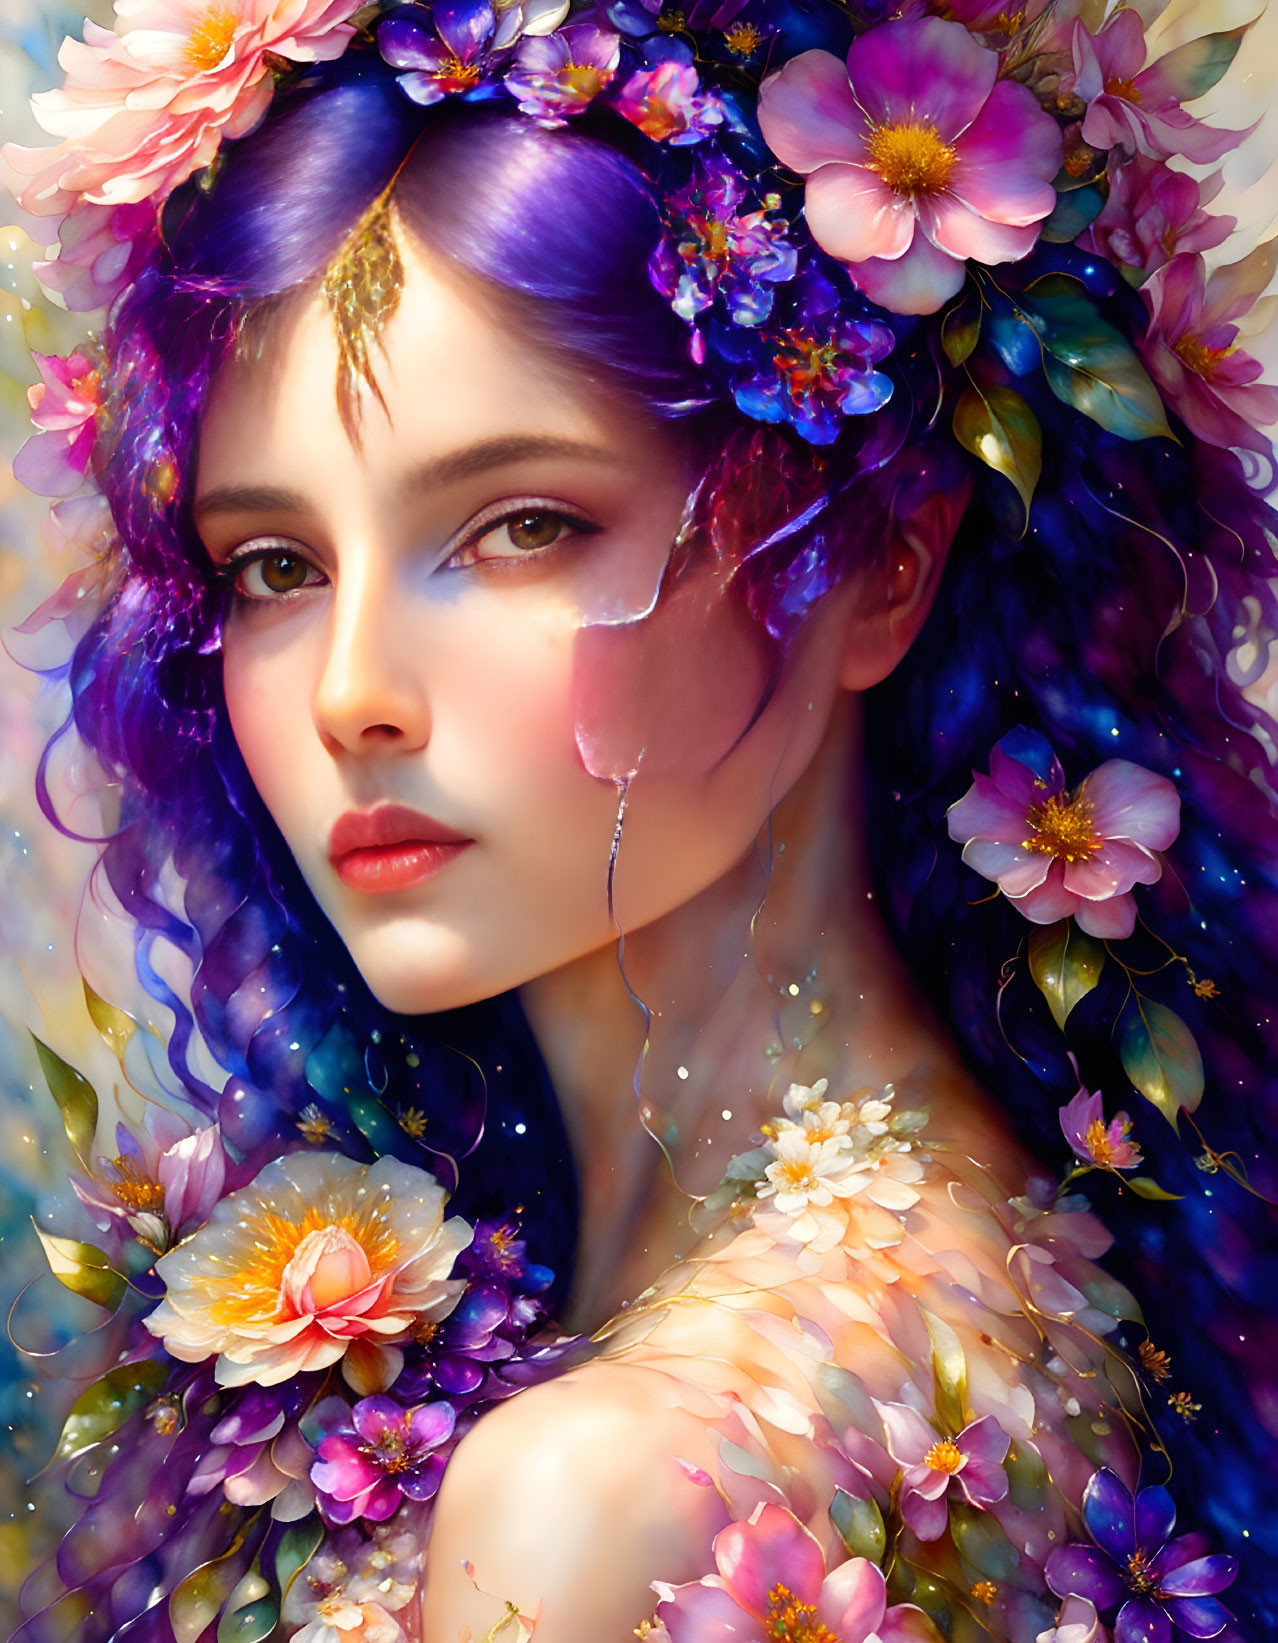 Digital artwork: Woman with purple hair and vibrant flower adornments